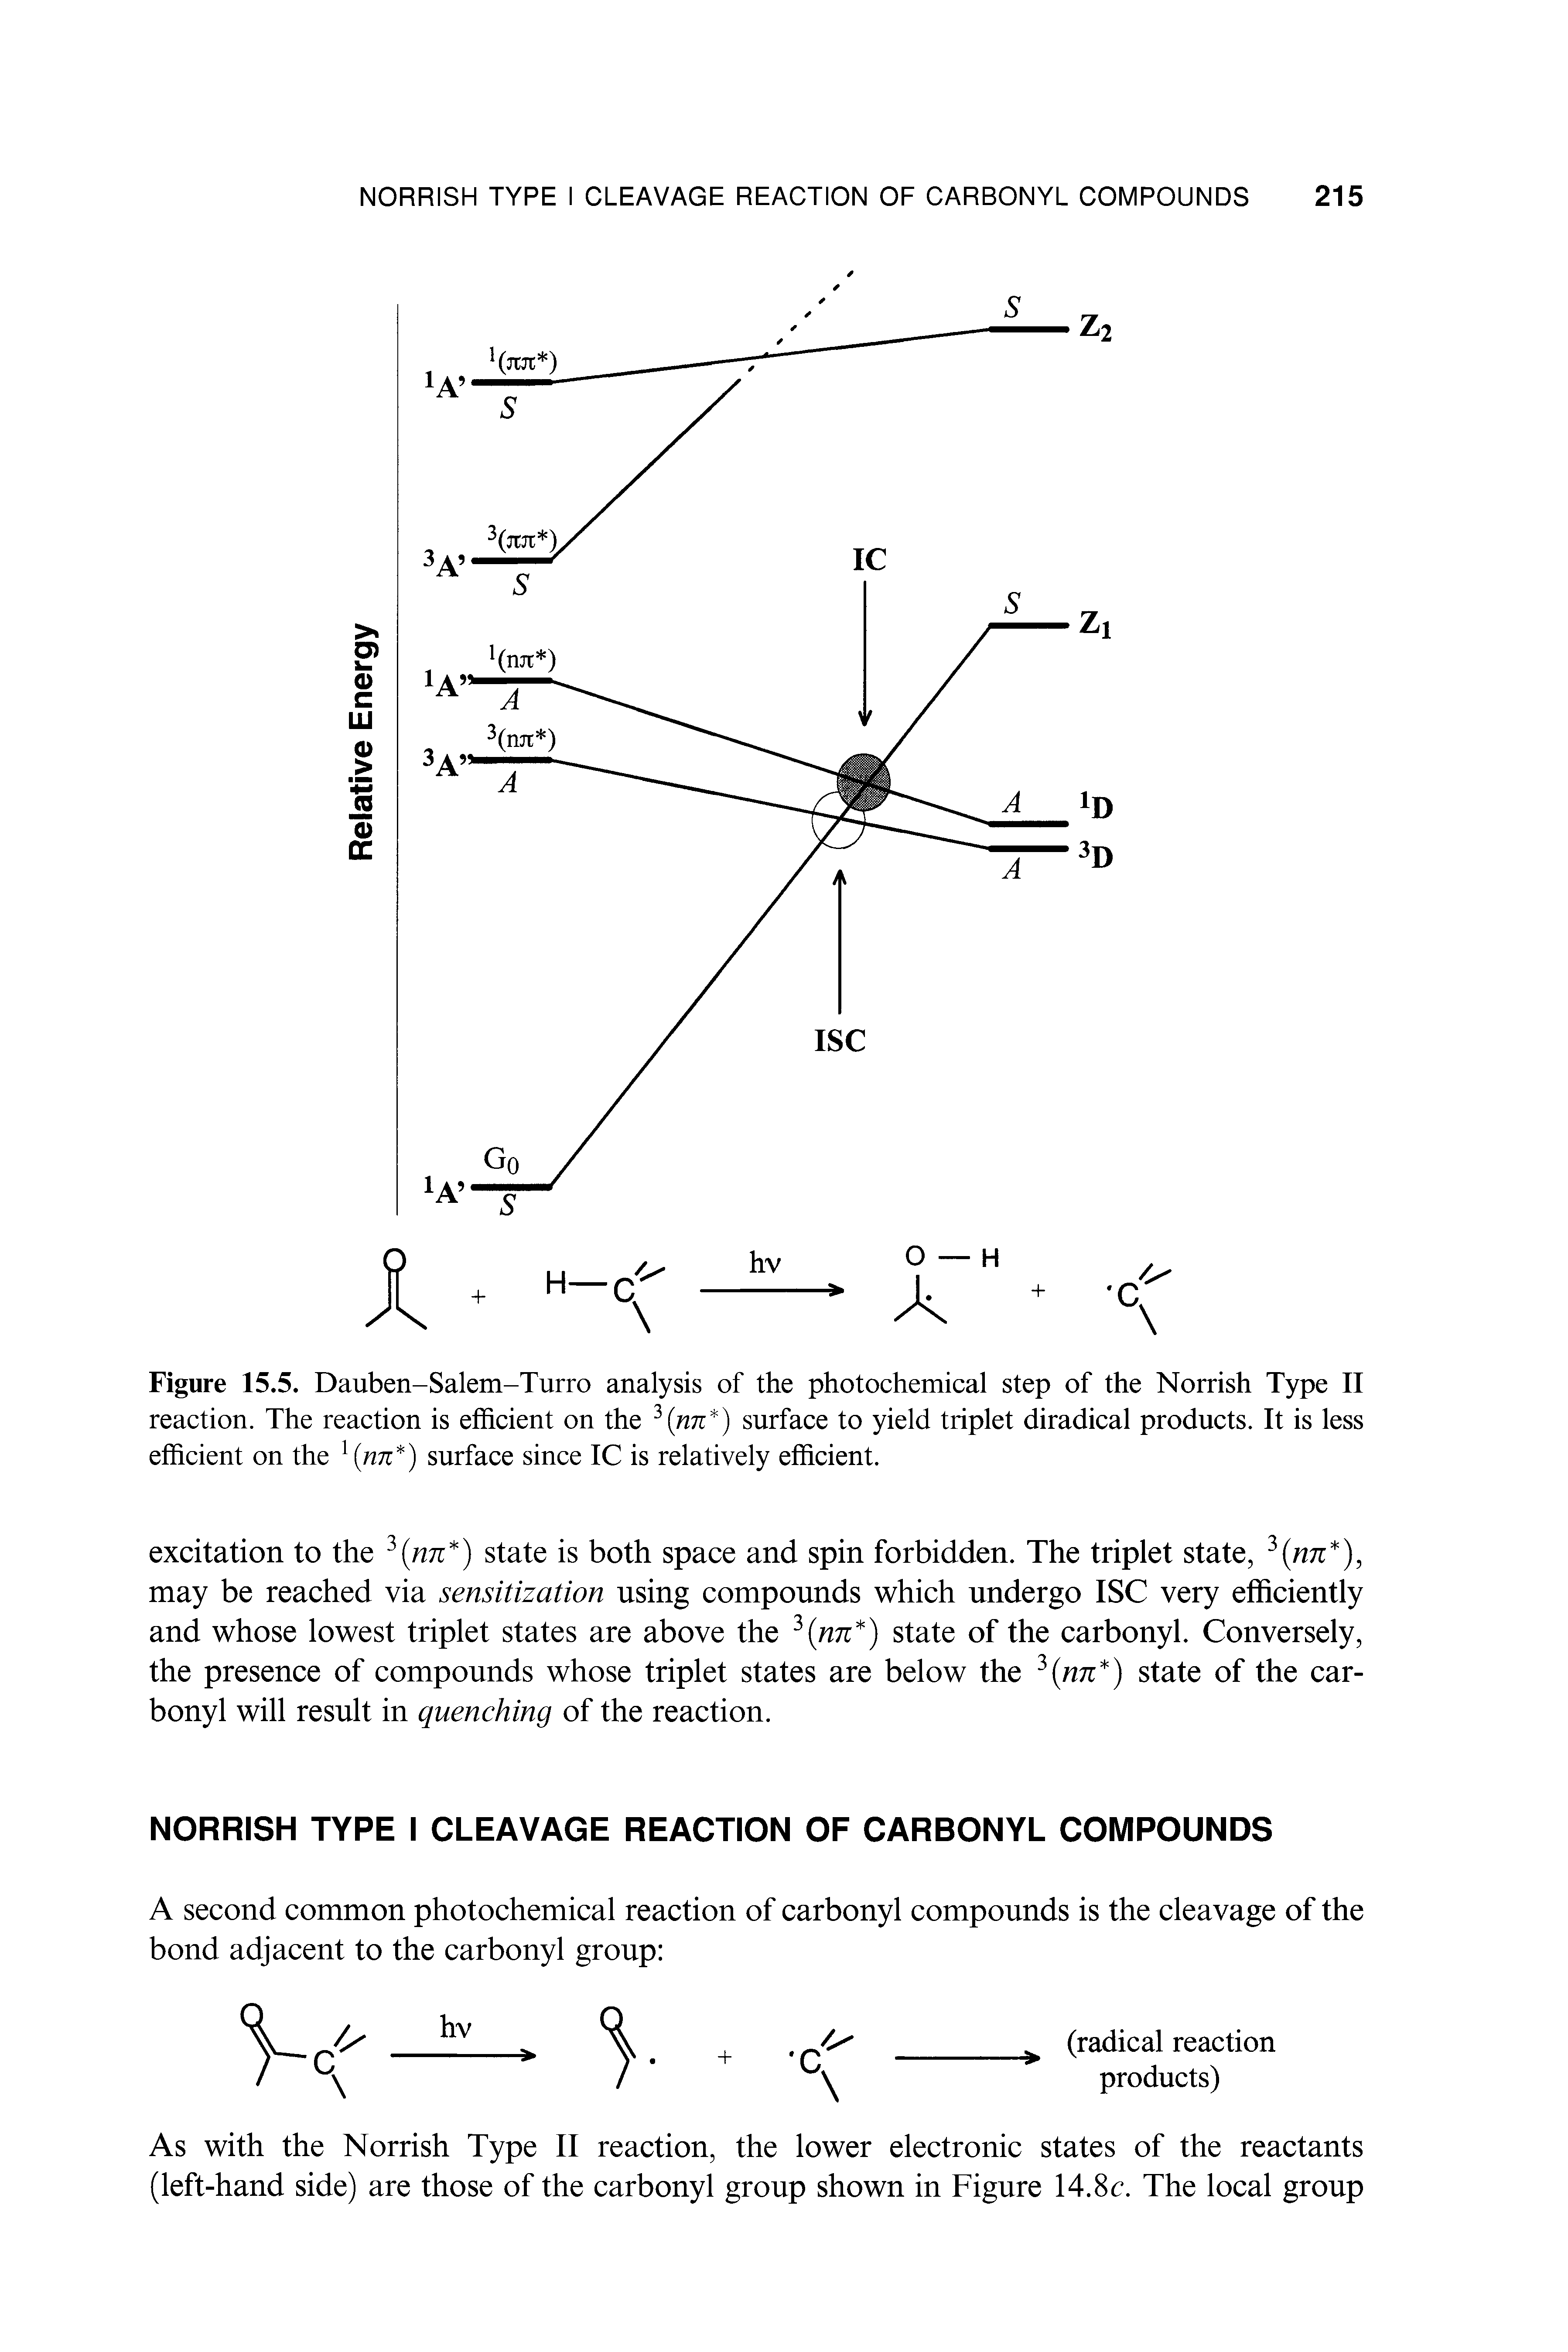 Figure 15.5. Dauben-Salem-Turro analysis of the photochemical step of the Norrish Type II reaction. The reaction is efficient on the 3(nn ) surface to yield triplet diradical products. It is less efficient on the 1(nn ) surface since IC is relatively efficient.